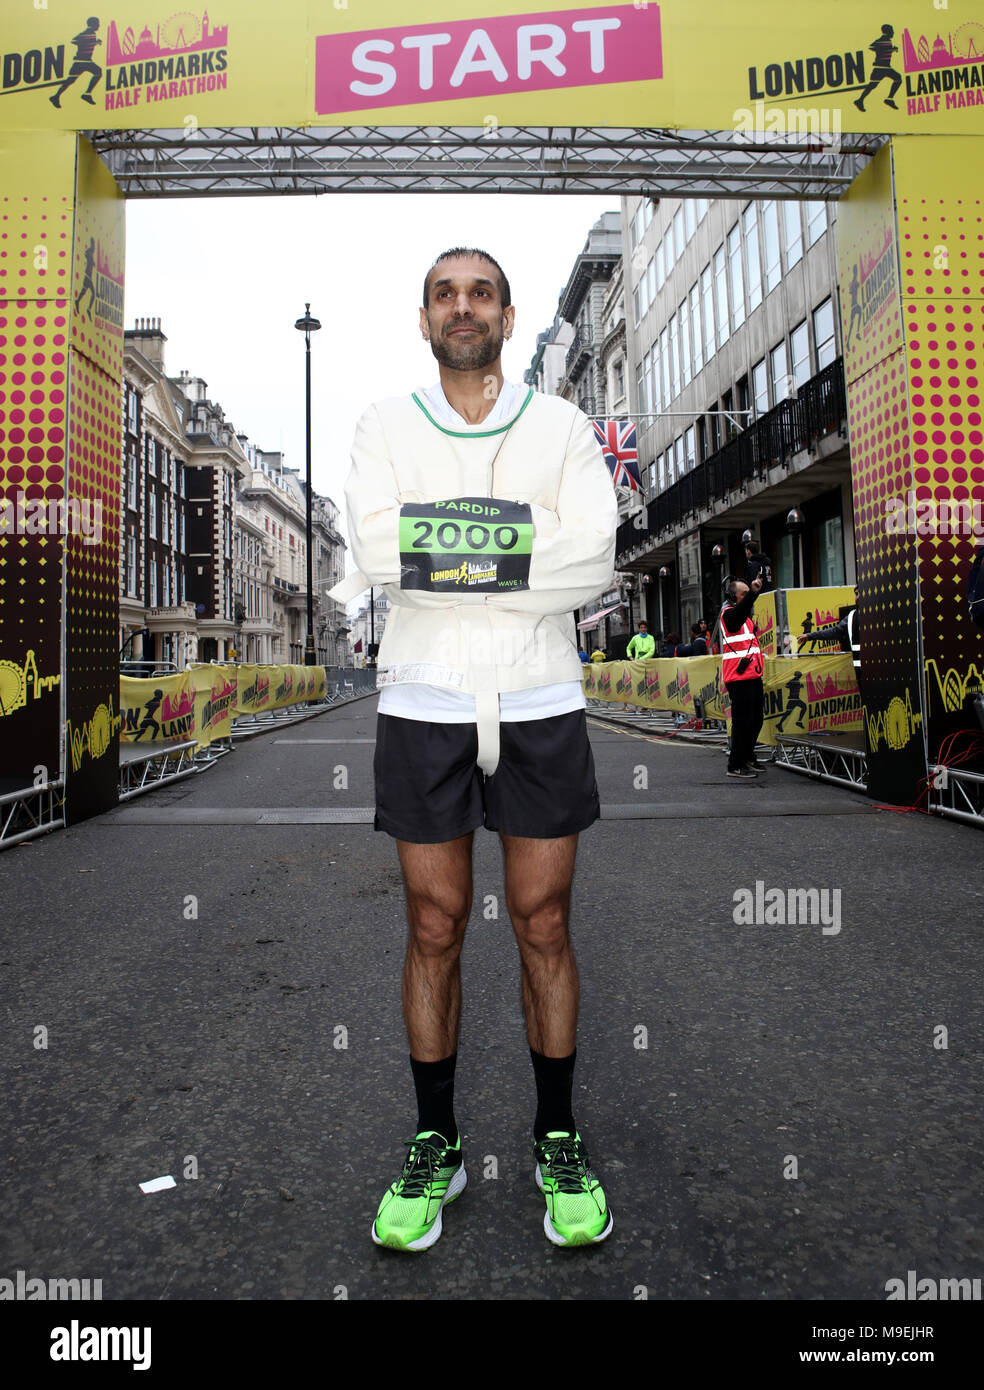 Pardip who will be running the 2018 London Landmarks Half Marathon in a straight jacket poses for a photo. PRESS ASSOCIATION Photo. Picture date: Sunday March 25, 2018. Photo credit should read: John Walton/PA Wire Stock Photo